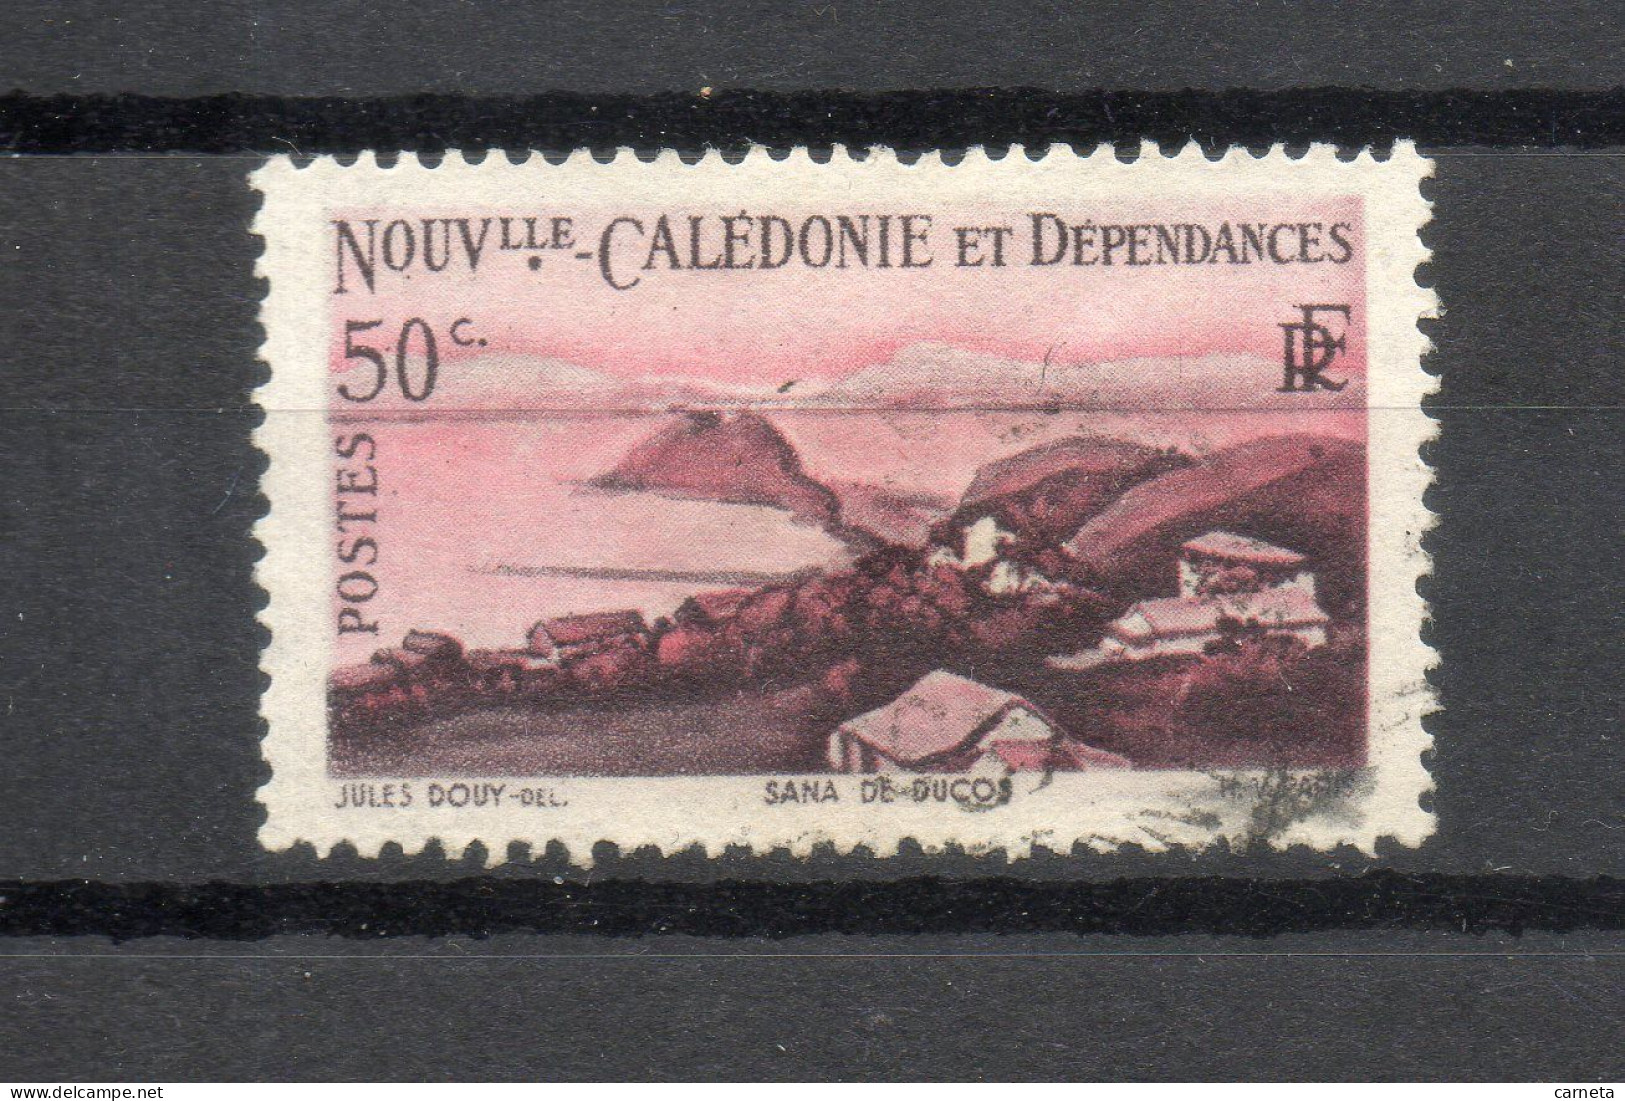 Nlle CALEDONIE N° 262   OBLITERE COTE 0.75€   PAYSAGE - Used Stamps